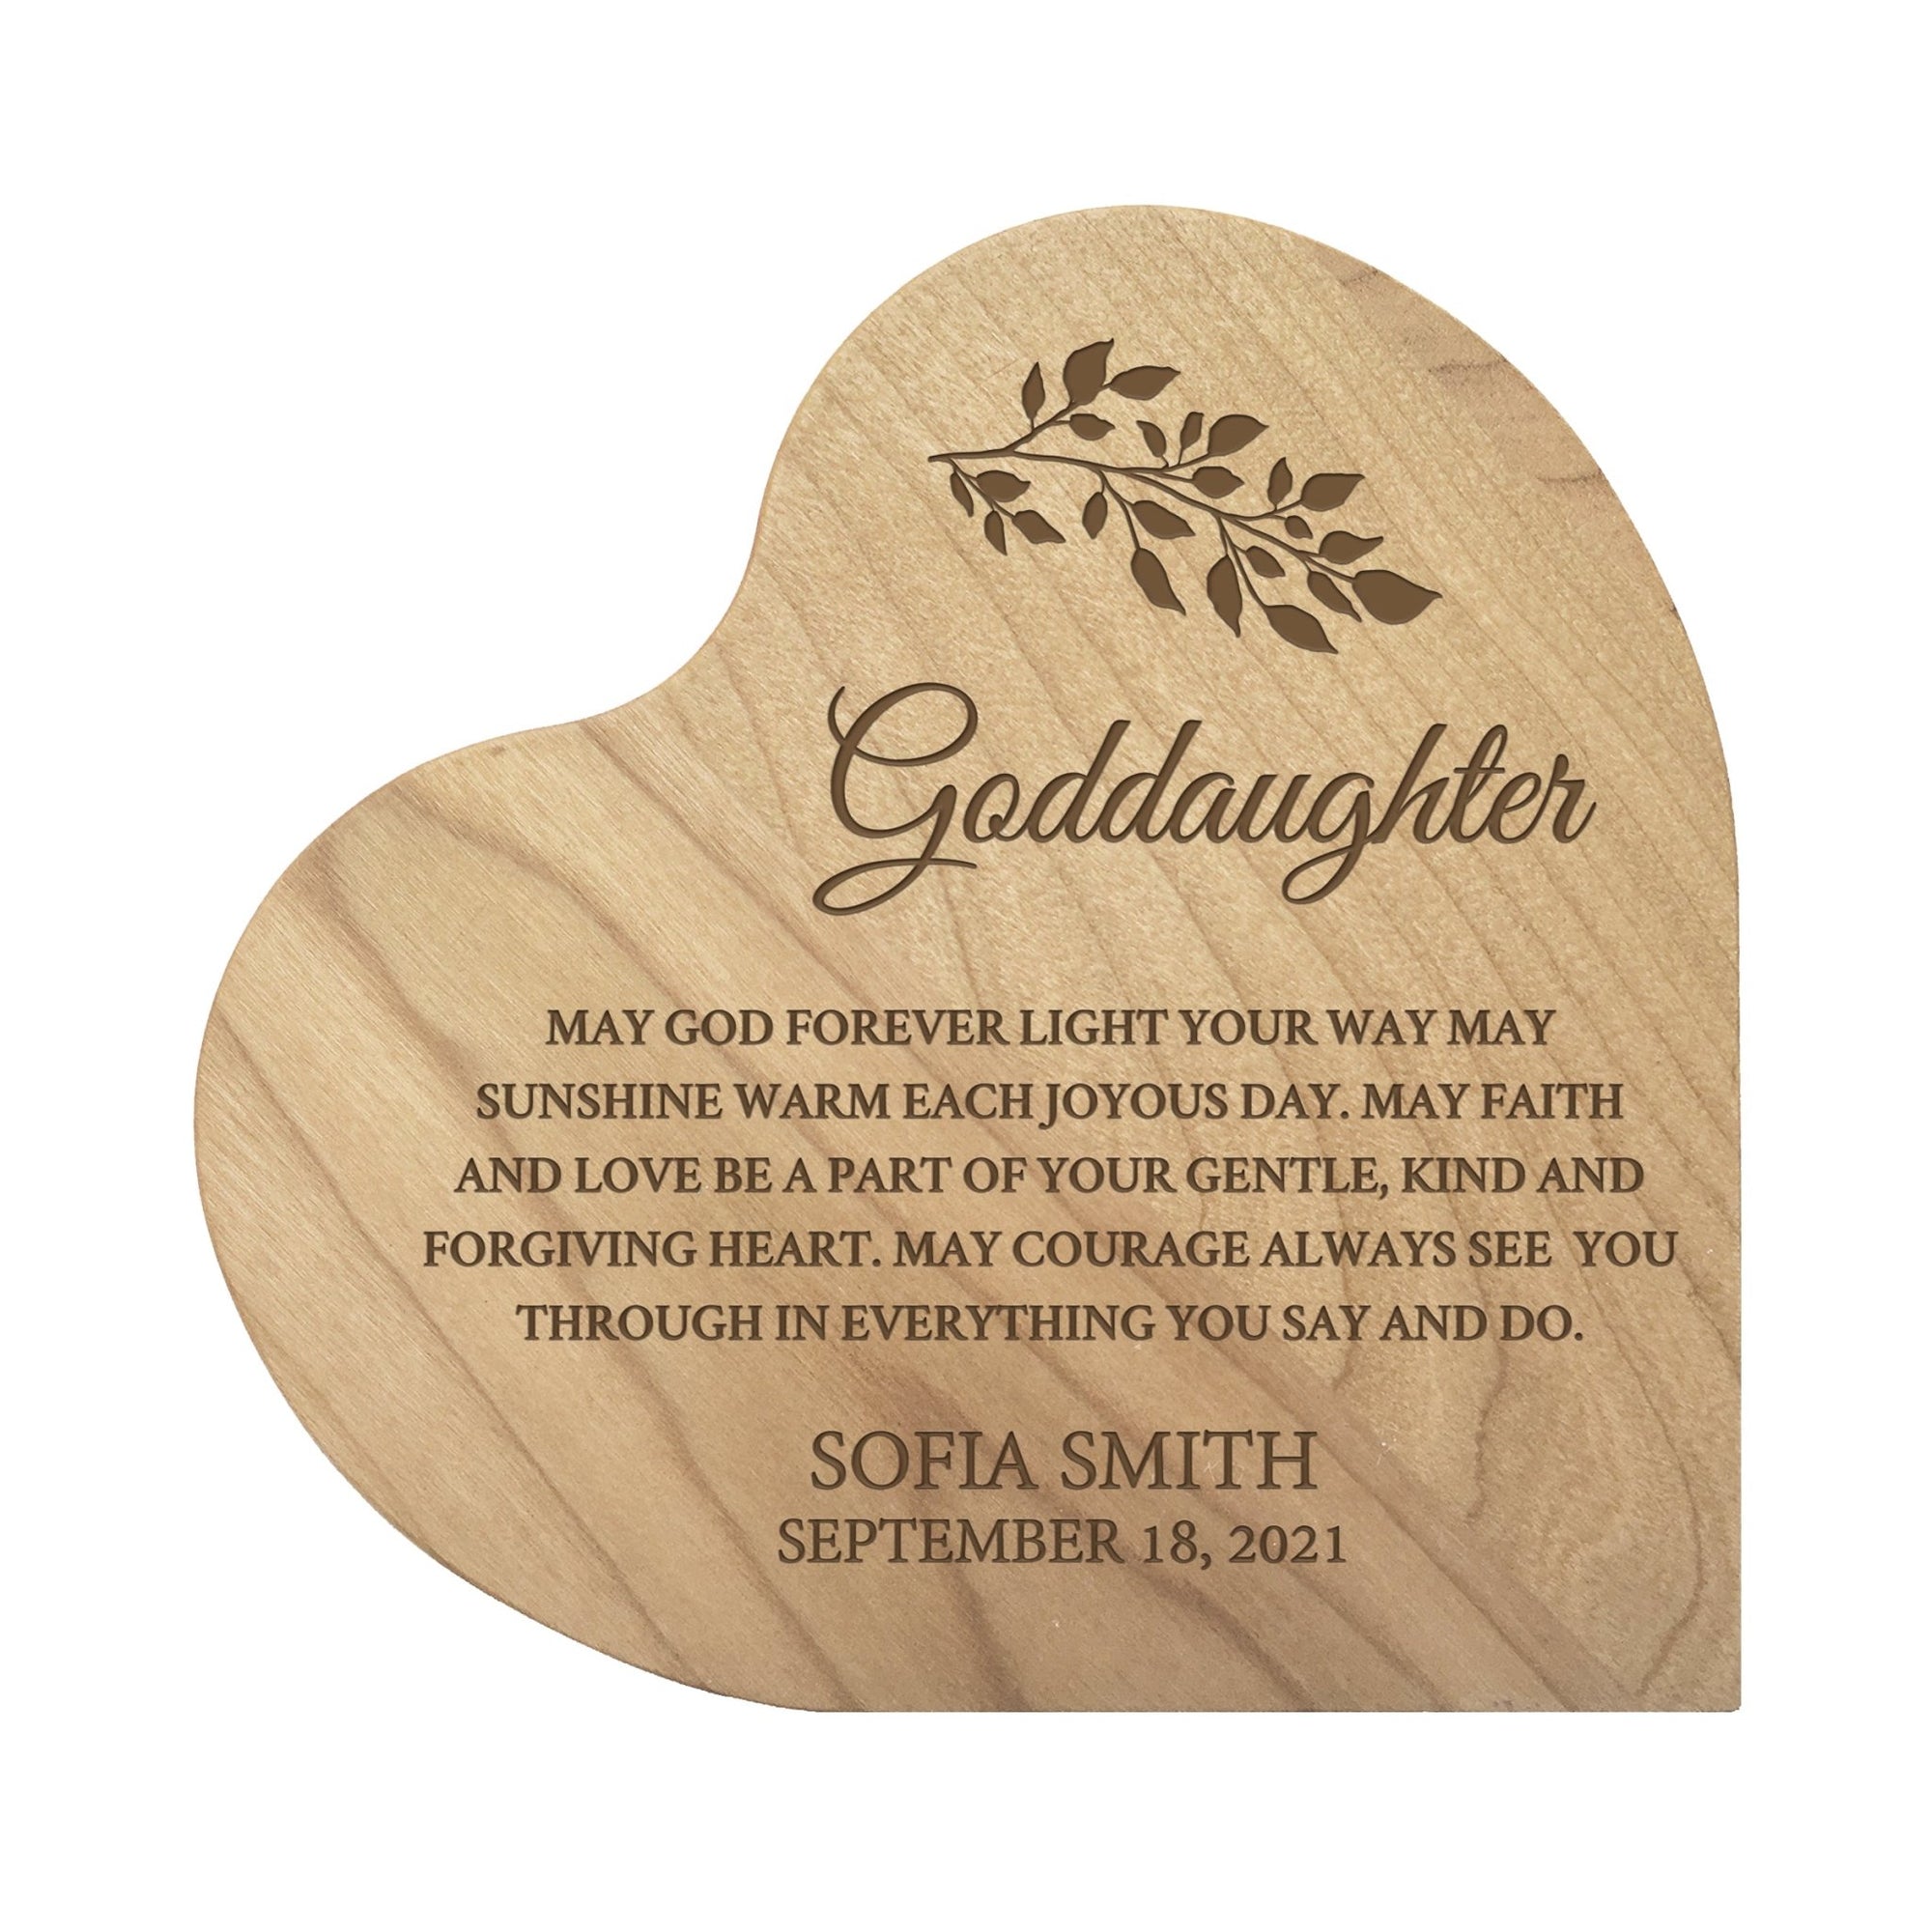 Personalized Modern Goddaughter’s Love Solid Wood Heart Decoration With Inspirational Verse Keepsake Gift 5x5.25 - May God Forever - LifeSong Milestones